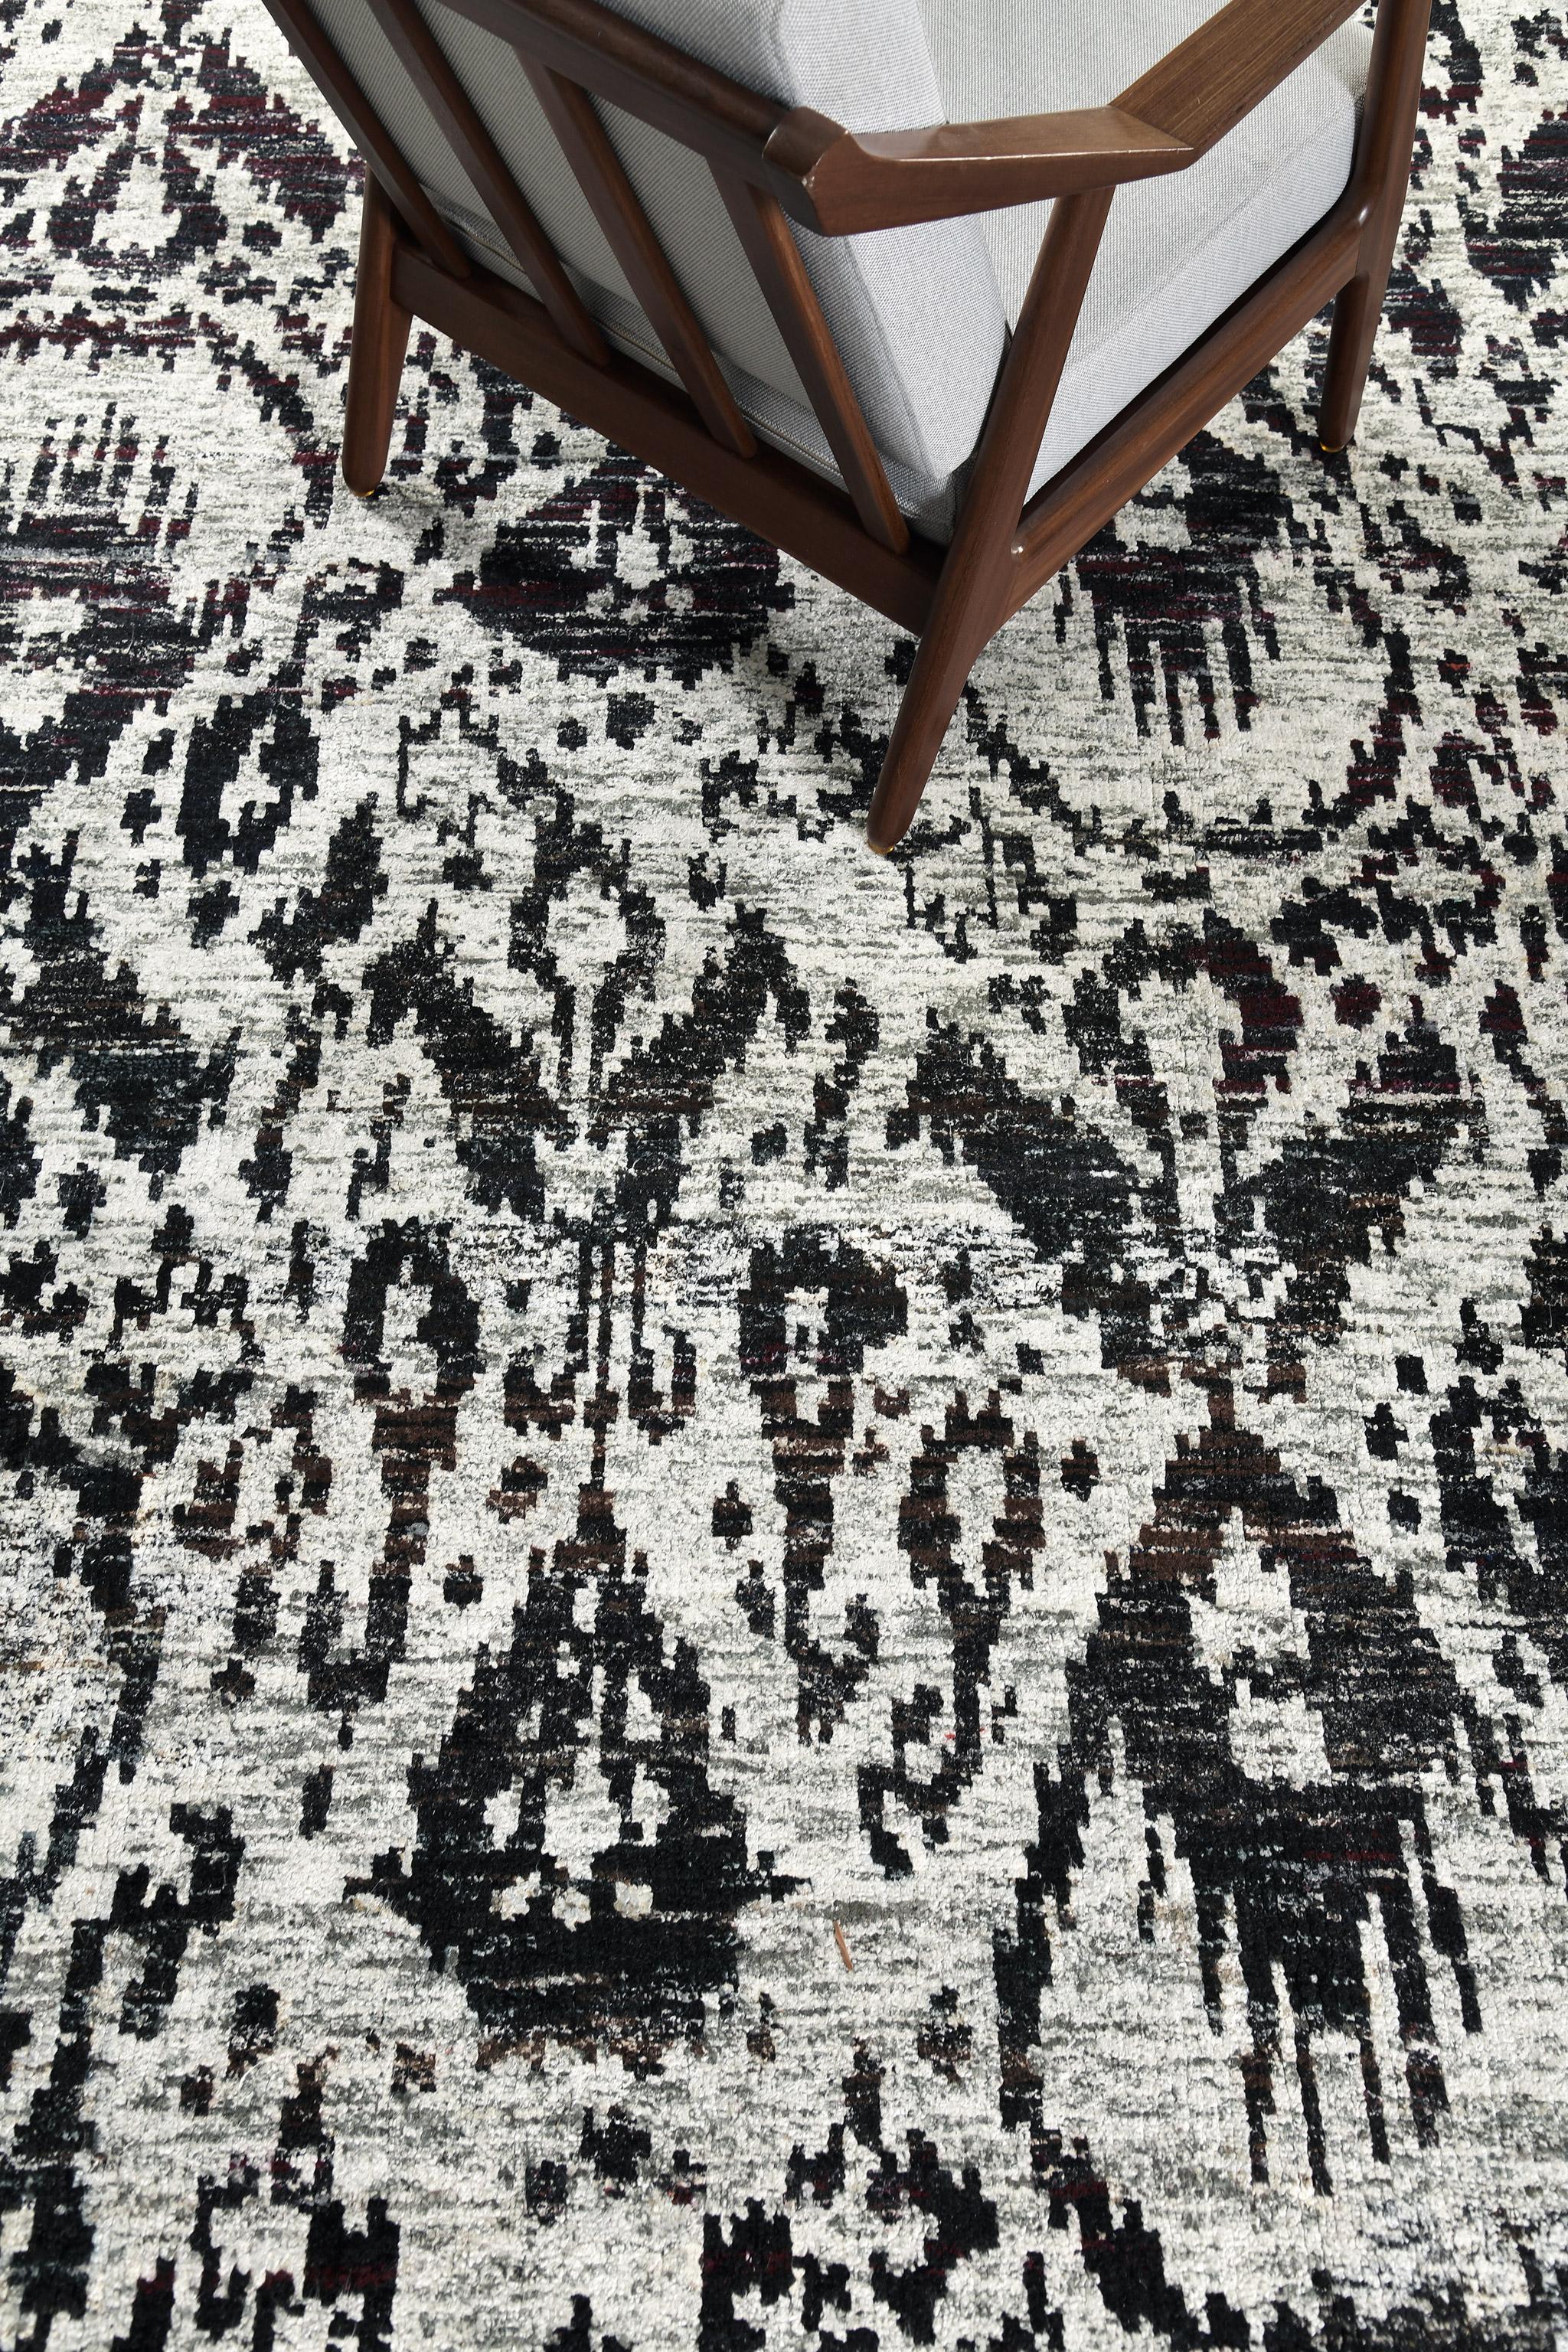 Adding this to your collection will make your guests in amazement. This gorgeous Ikat Designed Rug features a modest yet classy type of design. Perfect for any type of interior because of its simplicity.

Rug Number
25866
Size
9' 0